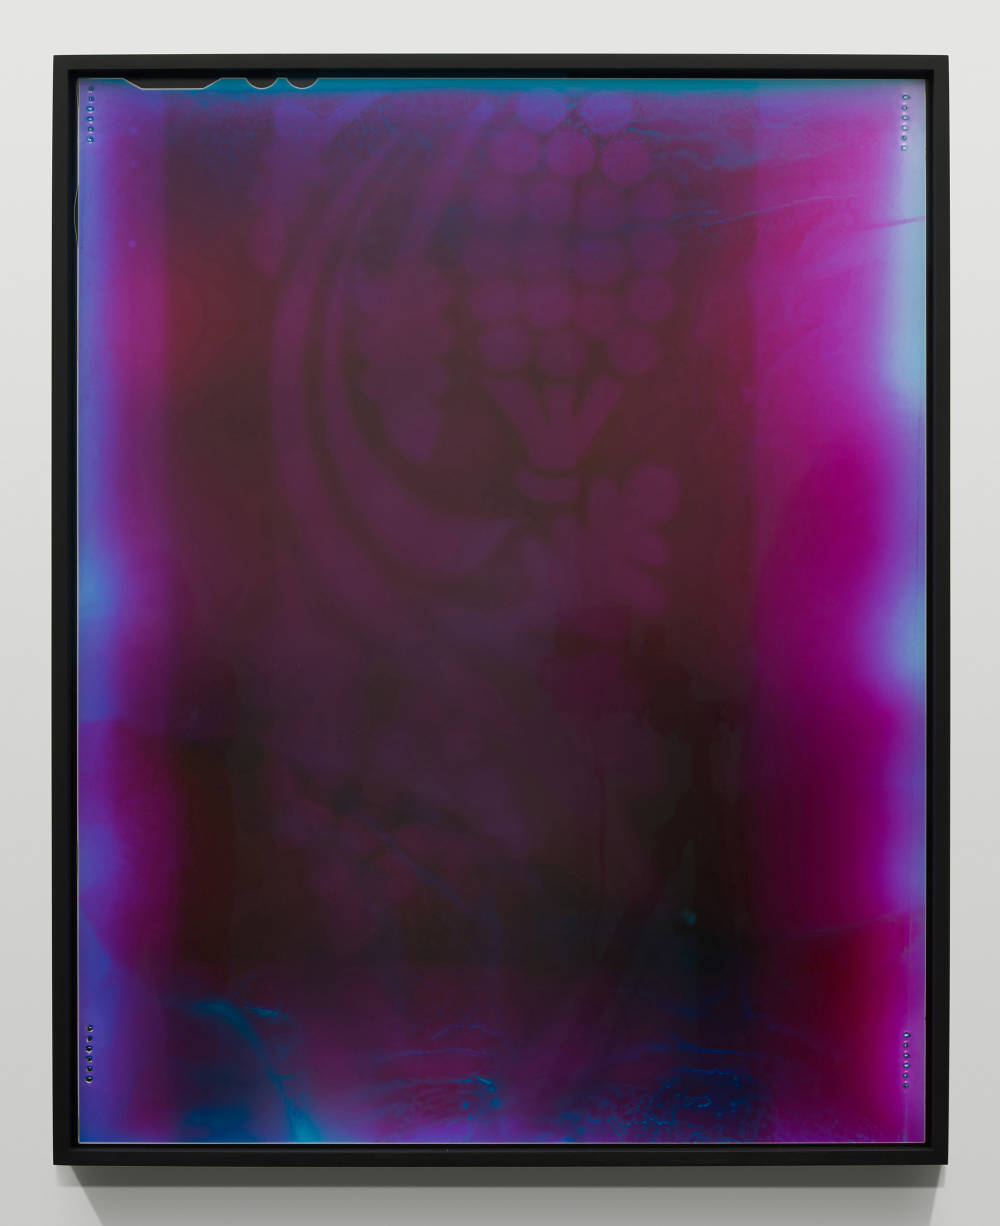 Image of photograph by Ketuta Alexi-Meskhishvili depicting and mostly purple image with a light blue tint around the edge of the image. There is a decorative pattern visible deep within the purple of the image. 